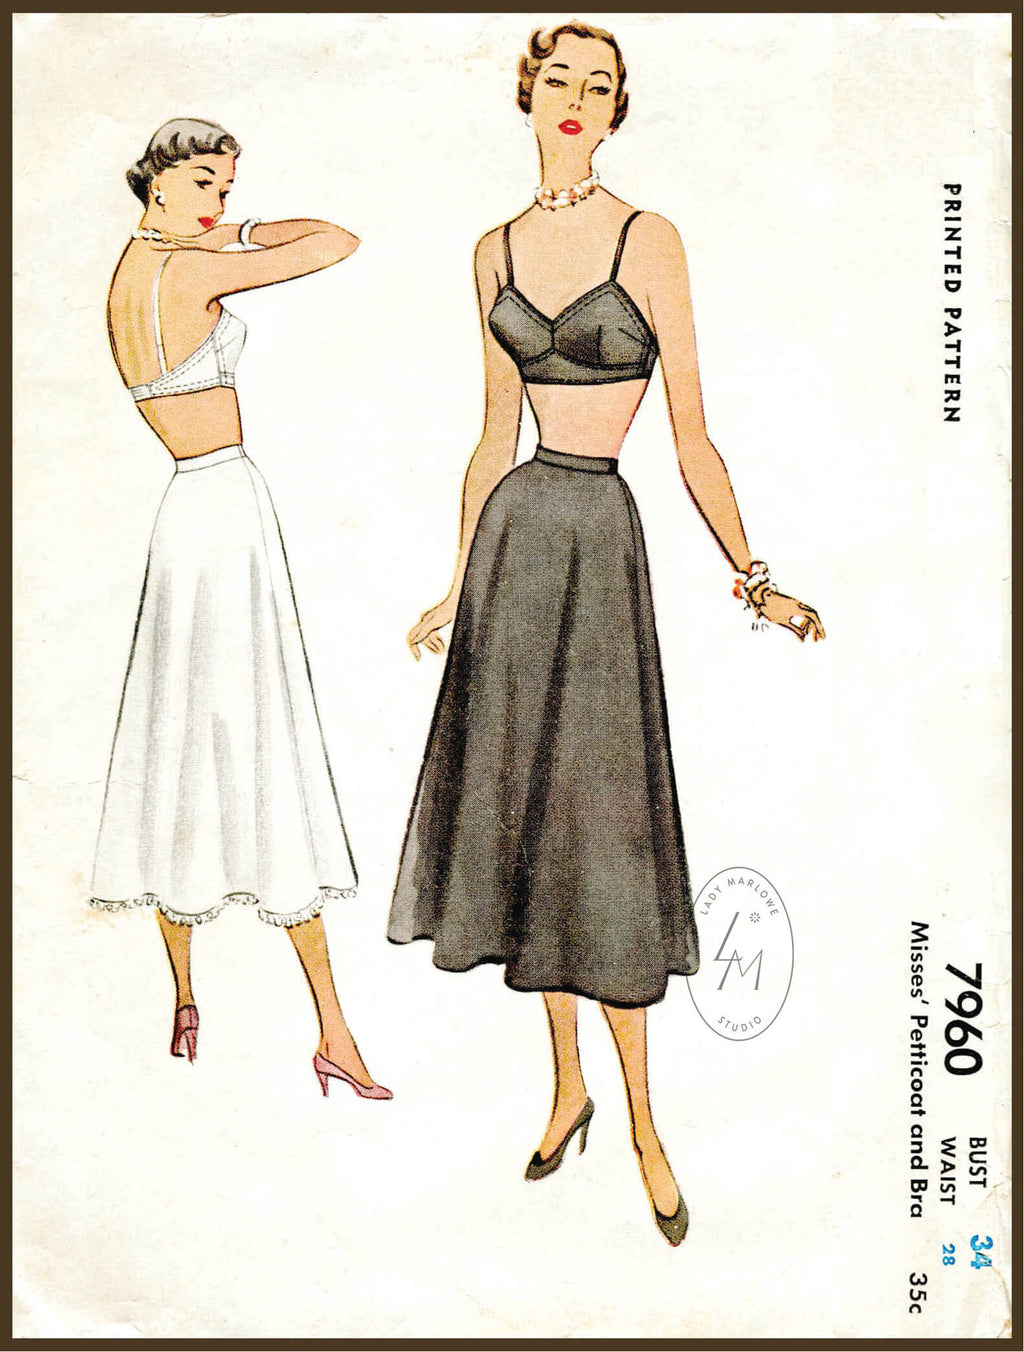 McCall 7960 1950s bra and petticoat vintage lingerie sewing pattern